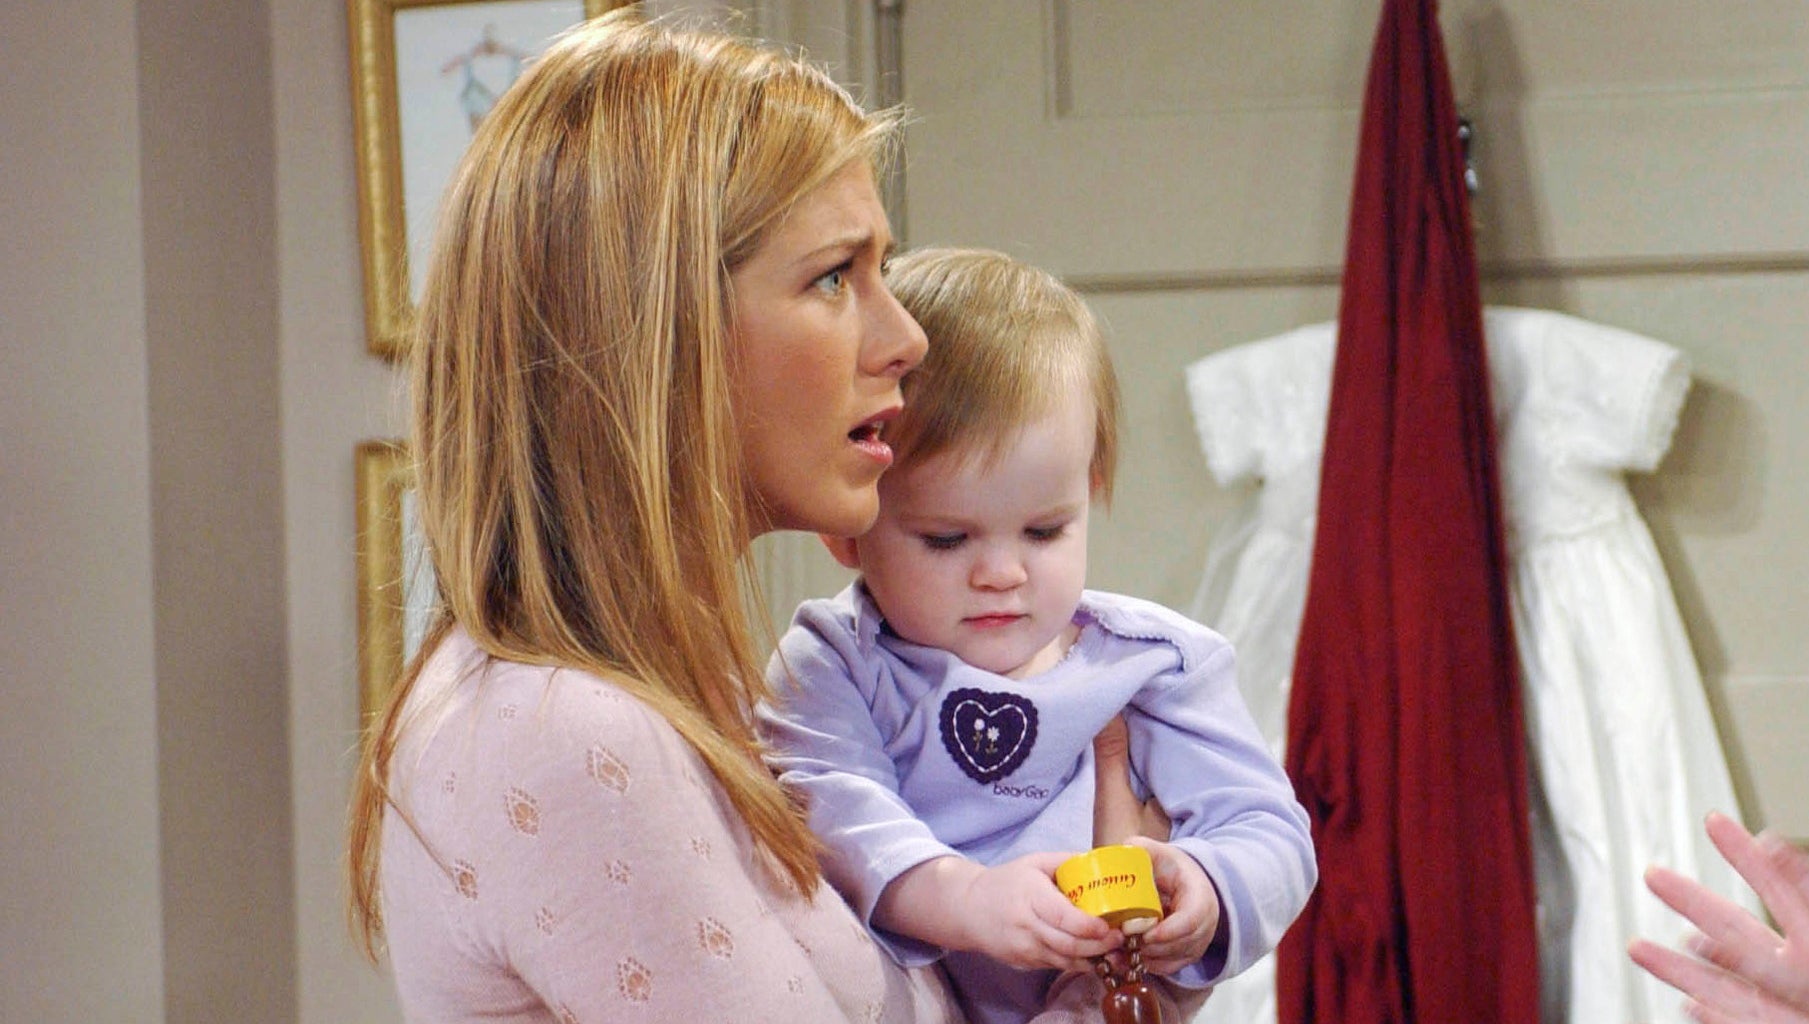 rachel holding a baby in the show